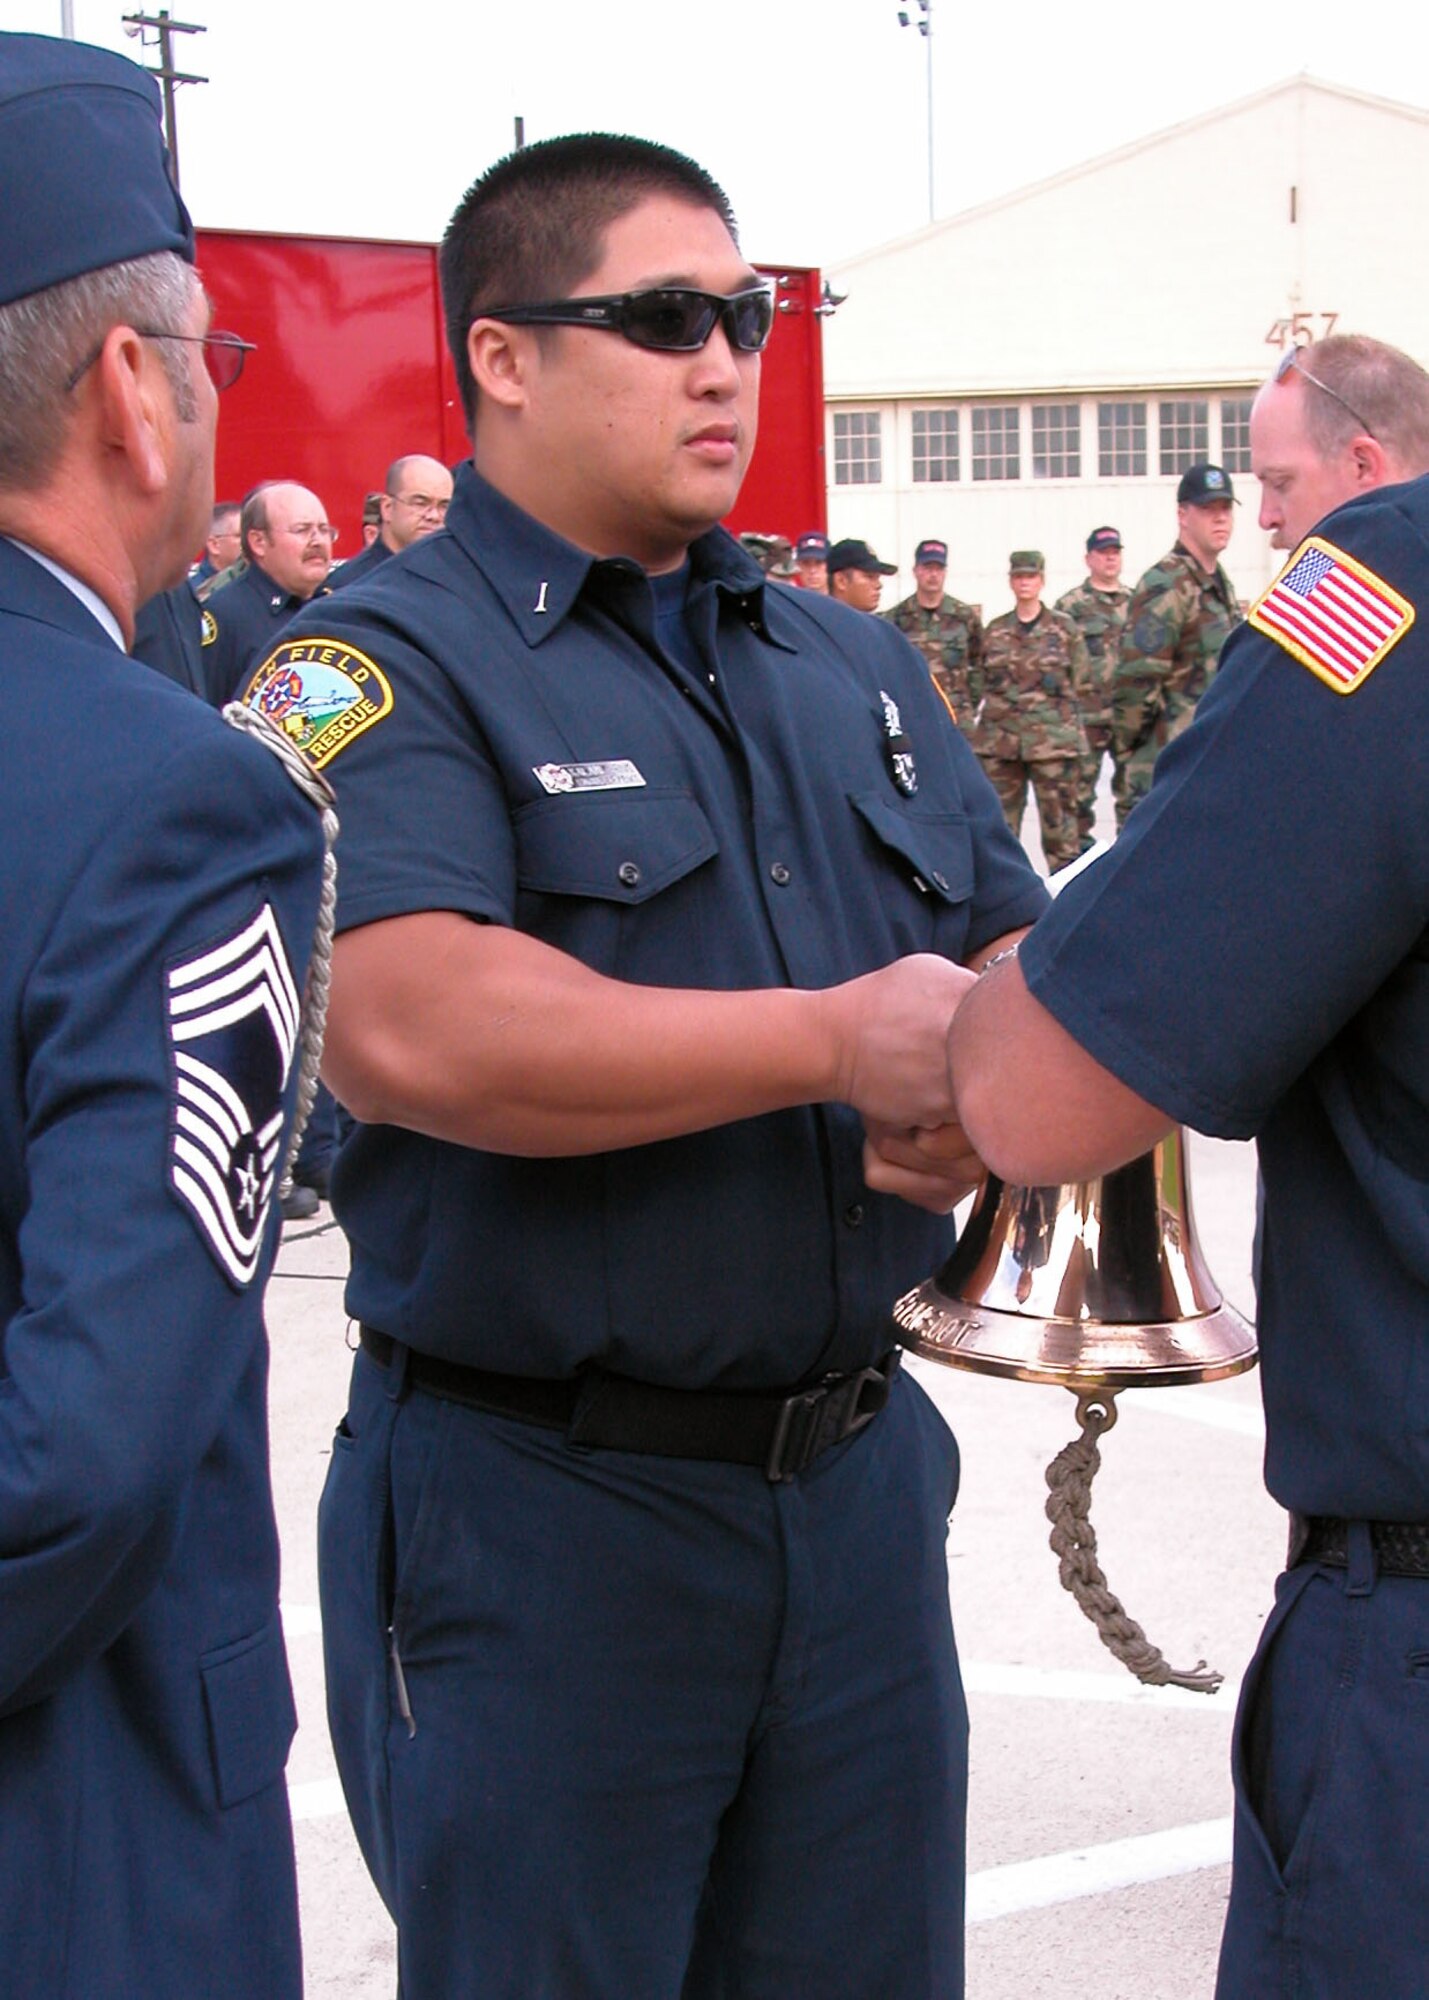 As fellow firefighters look on, Kalani Ching, a Fire Engineer with the 452nd Fire Emergency Services, participates in a Ringing of the Bell ceremony that took place Sunday morning at the base flag pole. This fallen fire fighter tradition was held to honor Staff Sgt. Ricardo Villalobos who died of a motorcycle accident Saturday. (U.S. Air Force photo by Capt. Caroline J. Lorimer)